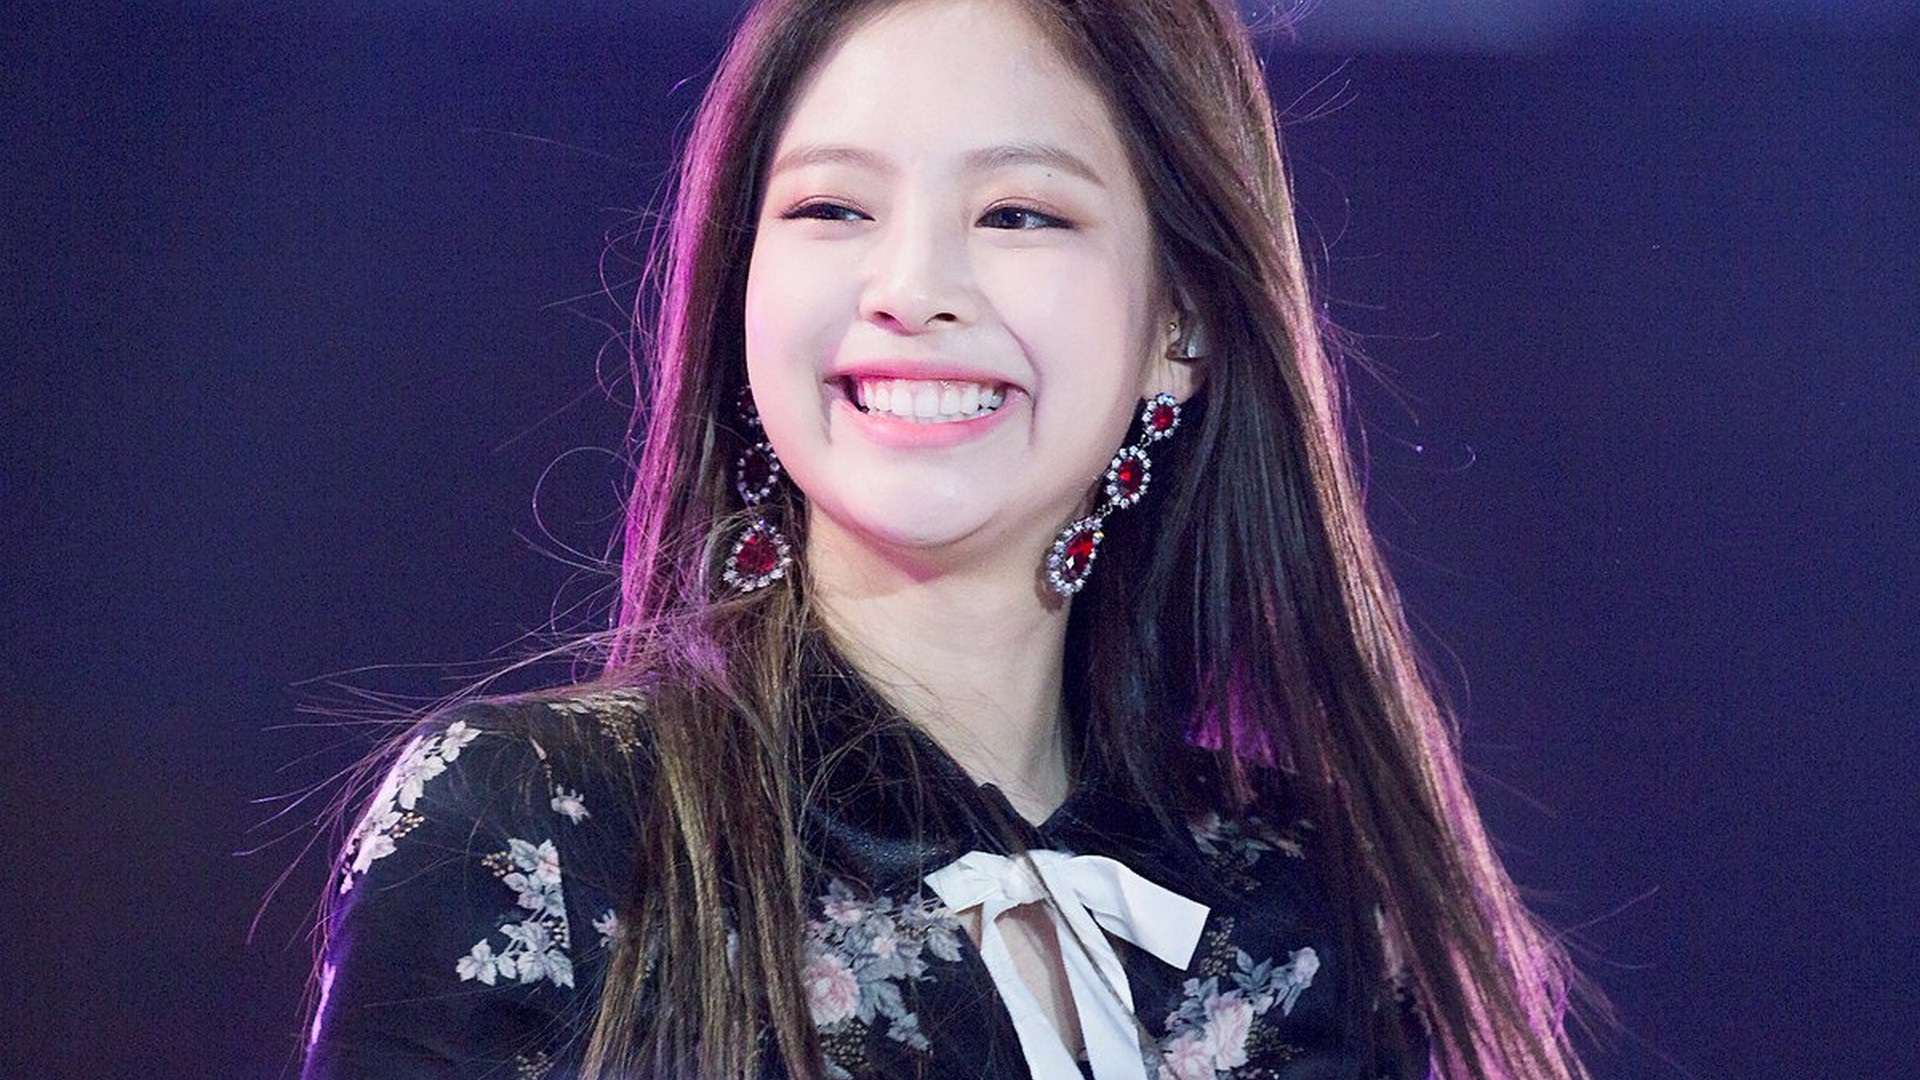 Blackpink Cute Pictures Wallpapers